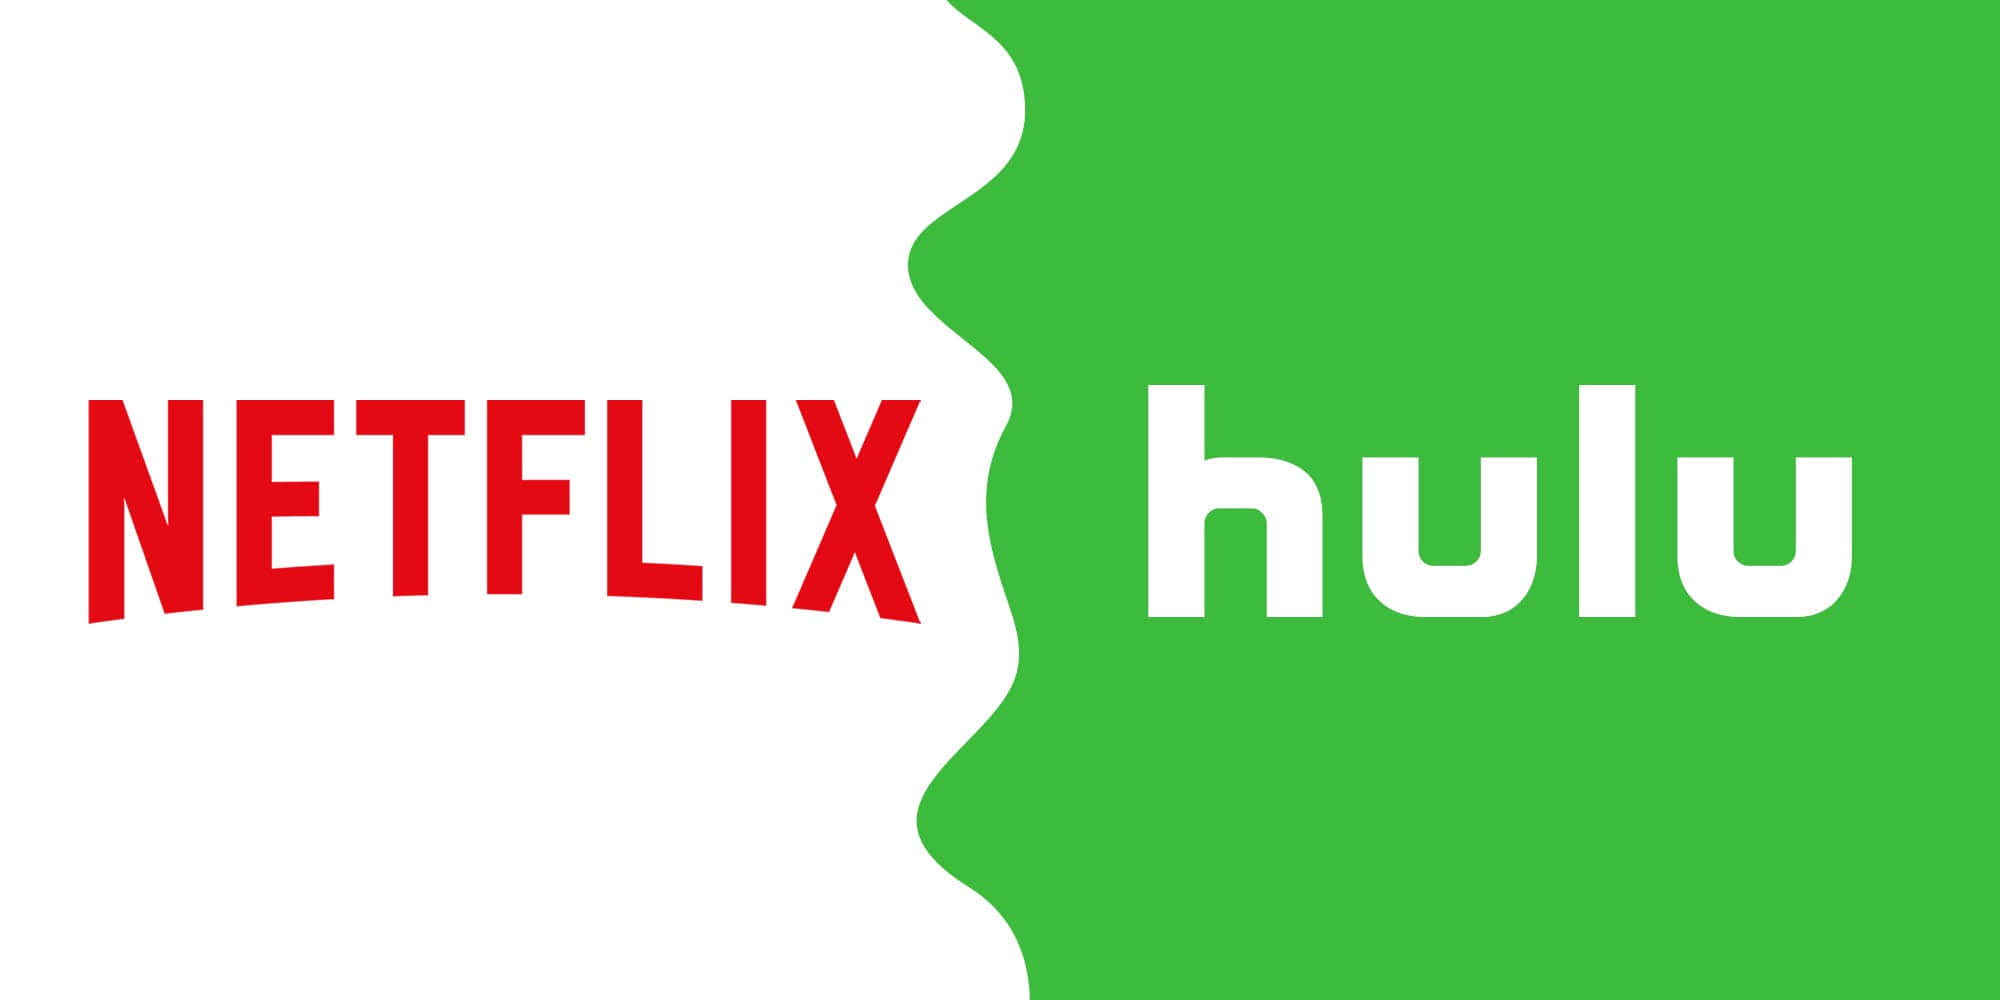 Stream hit movies and TV shows with Hulu